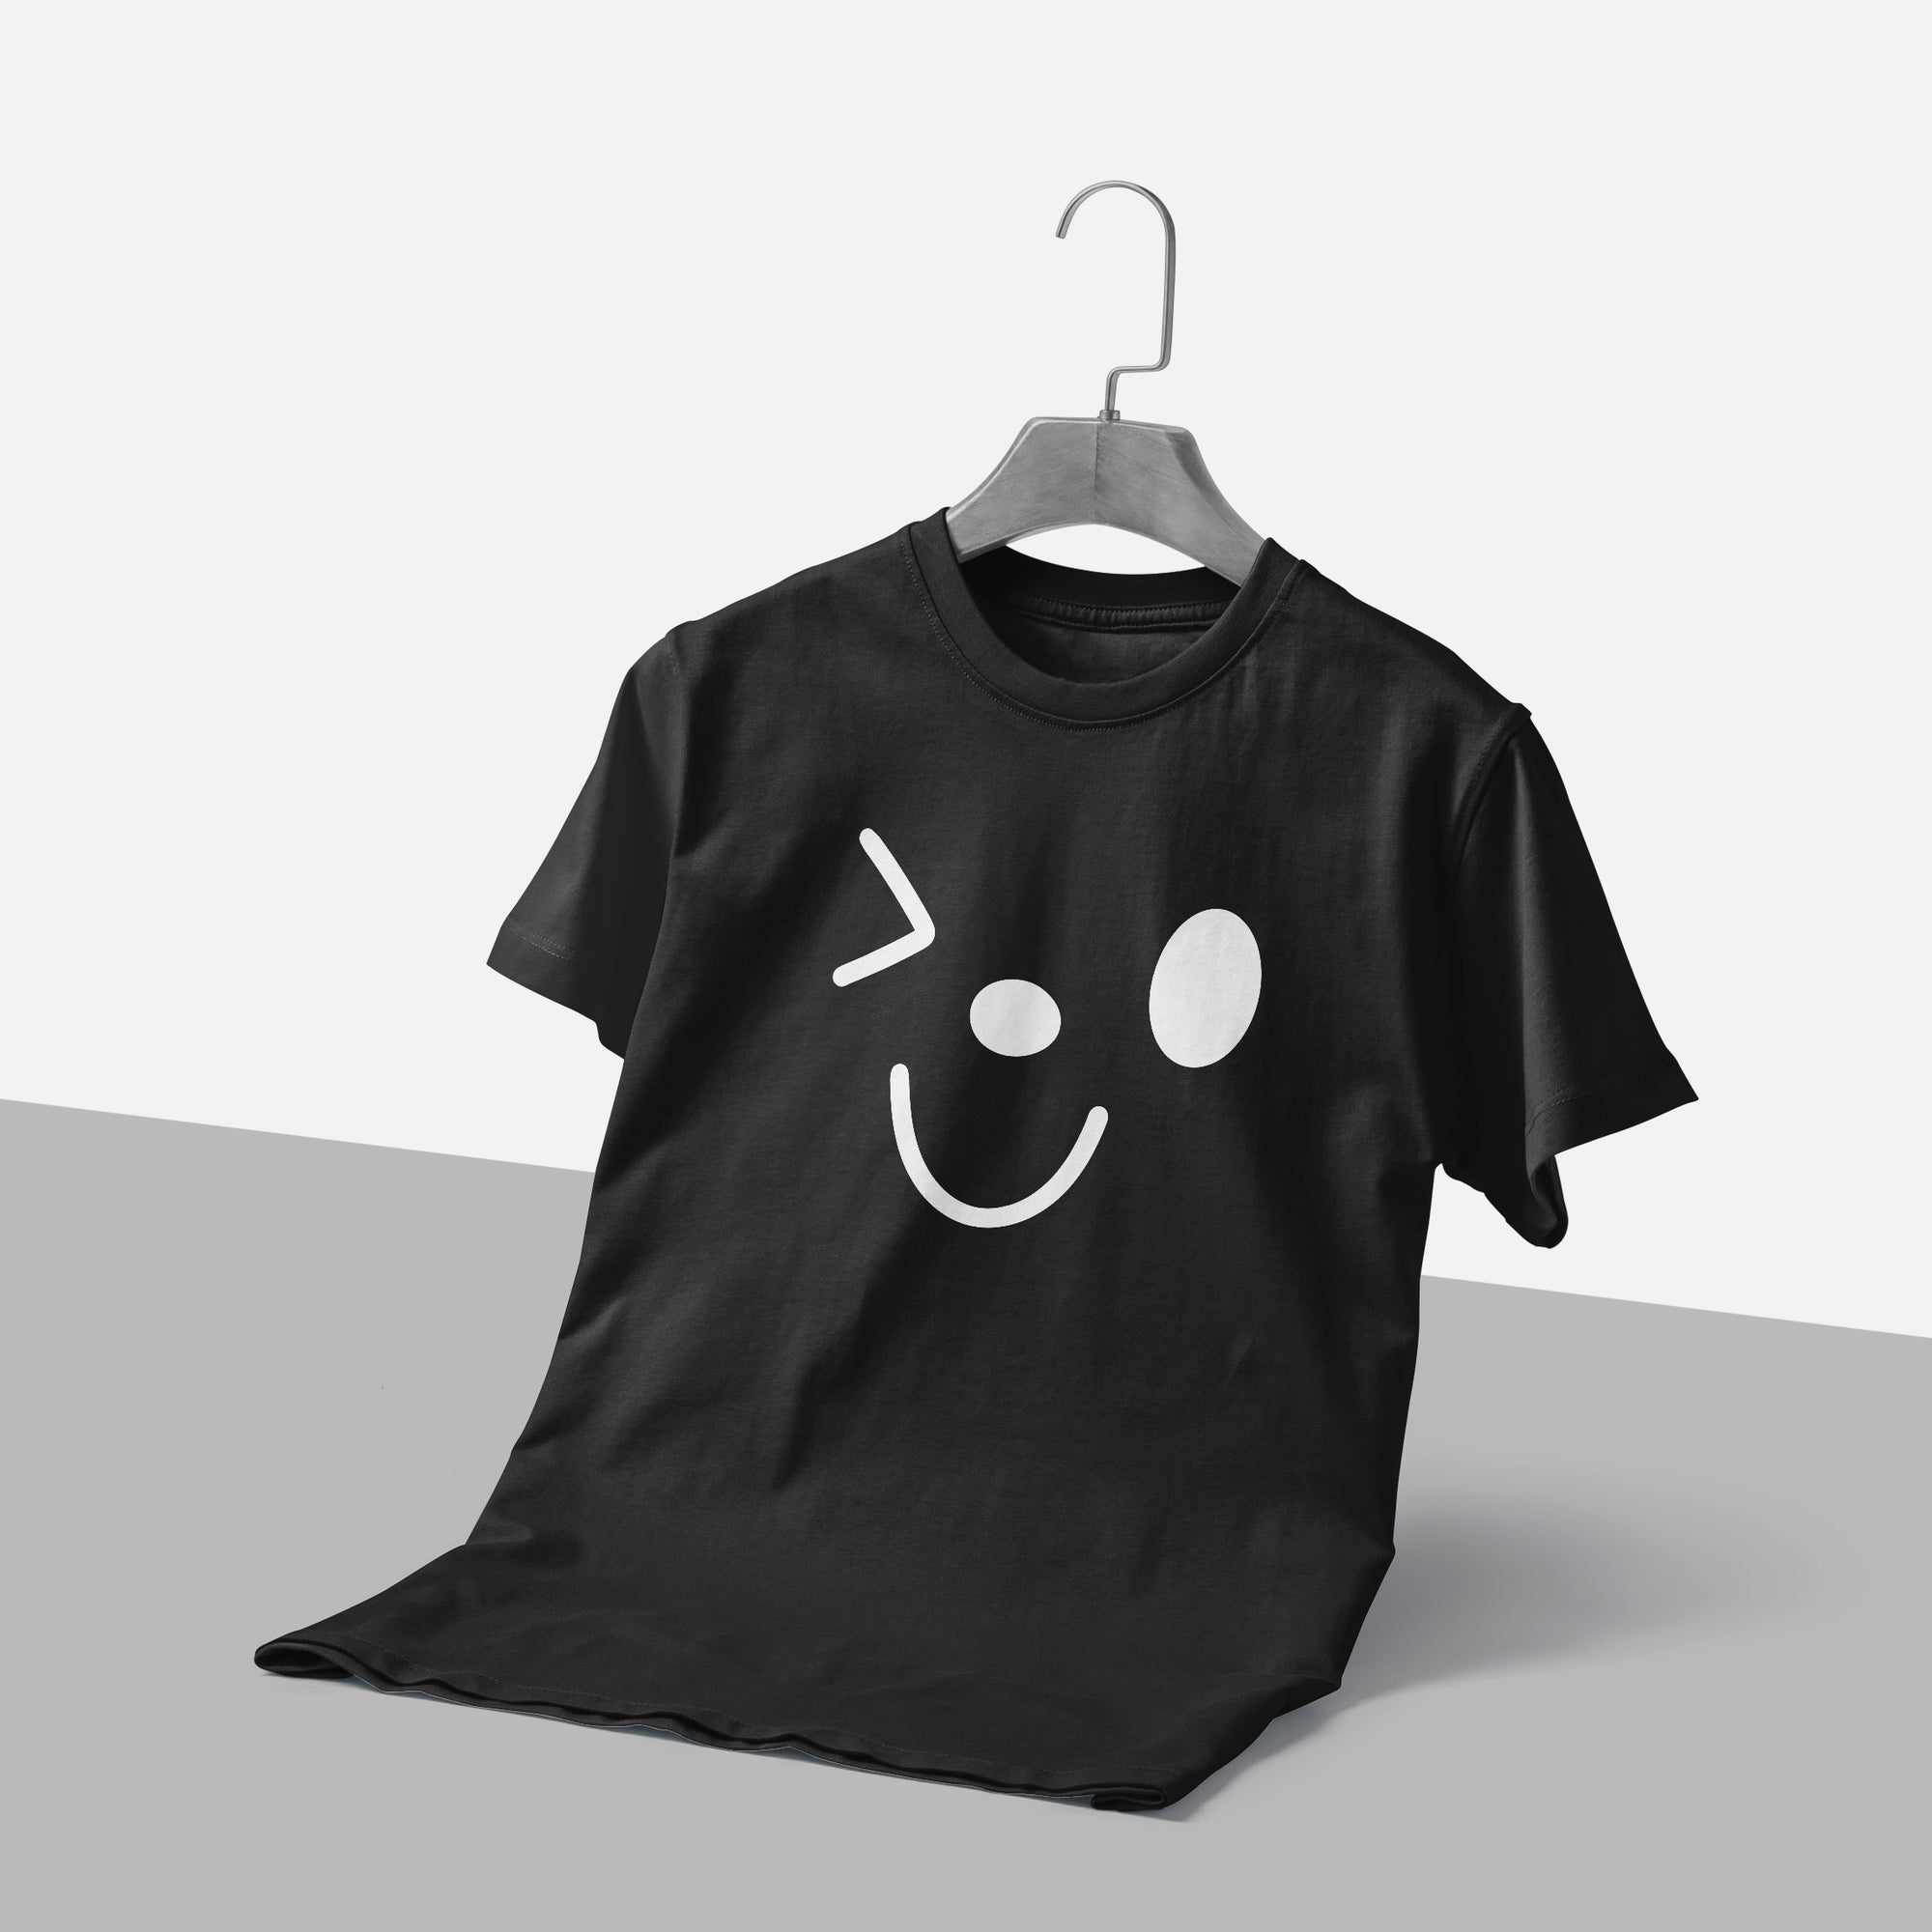 Winking Tongue-Out Smiley Face T-Shirt